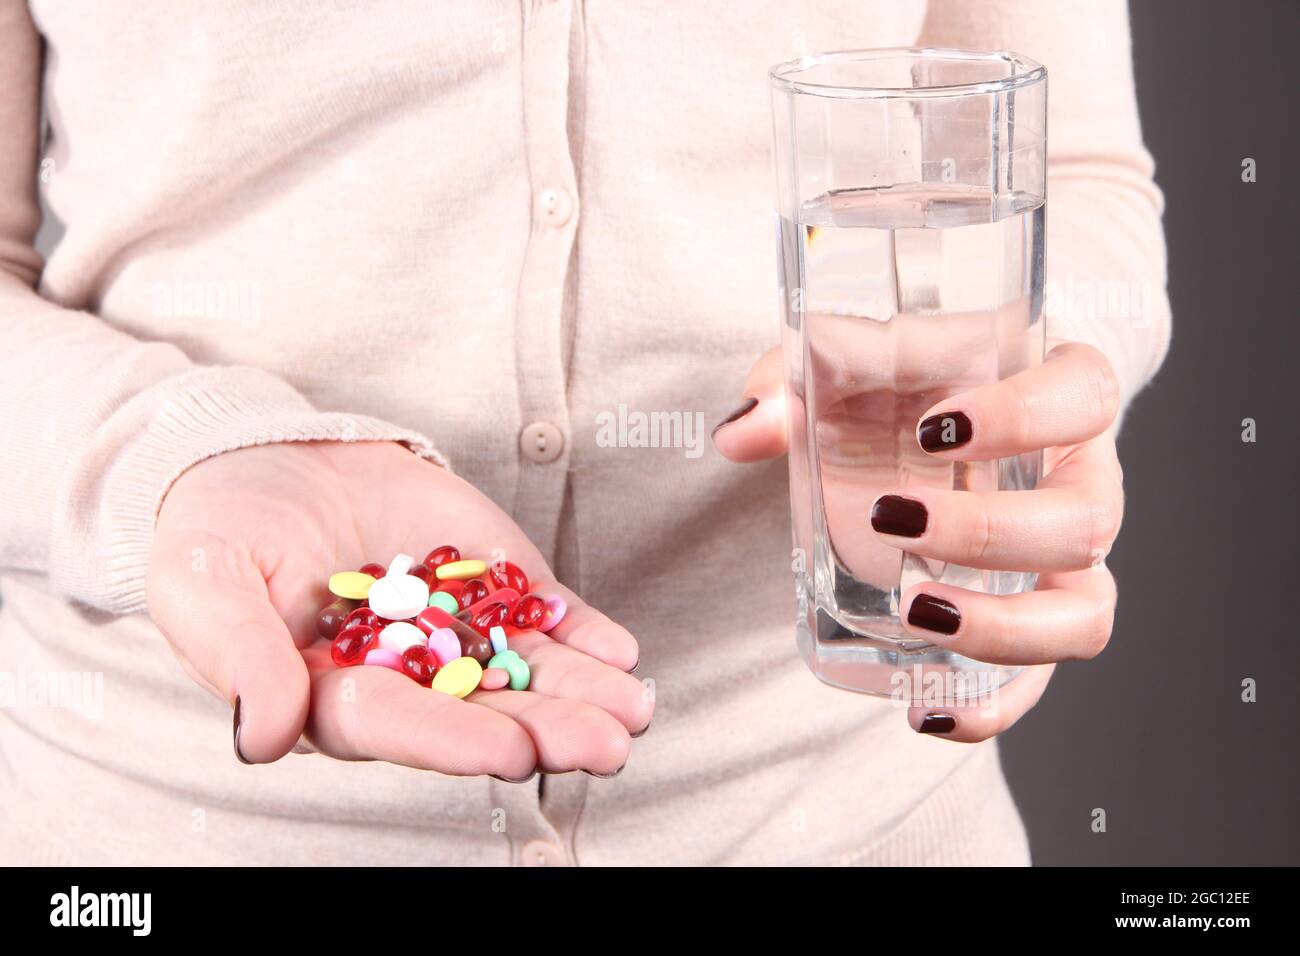 Many pills and glass water in hand Stock Photo